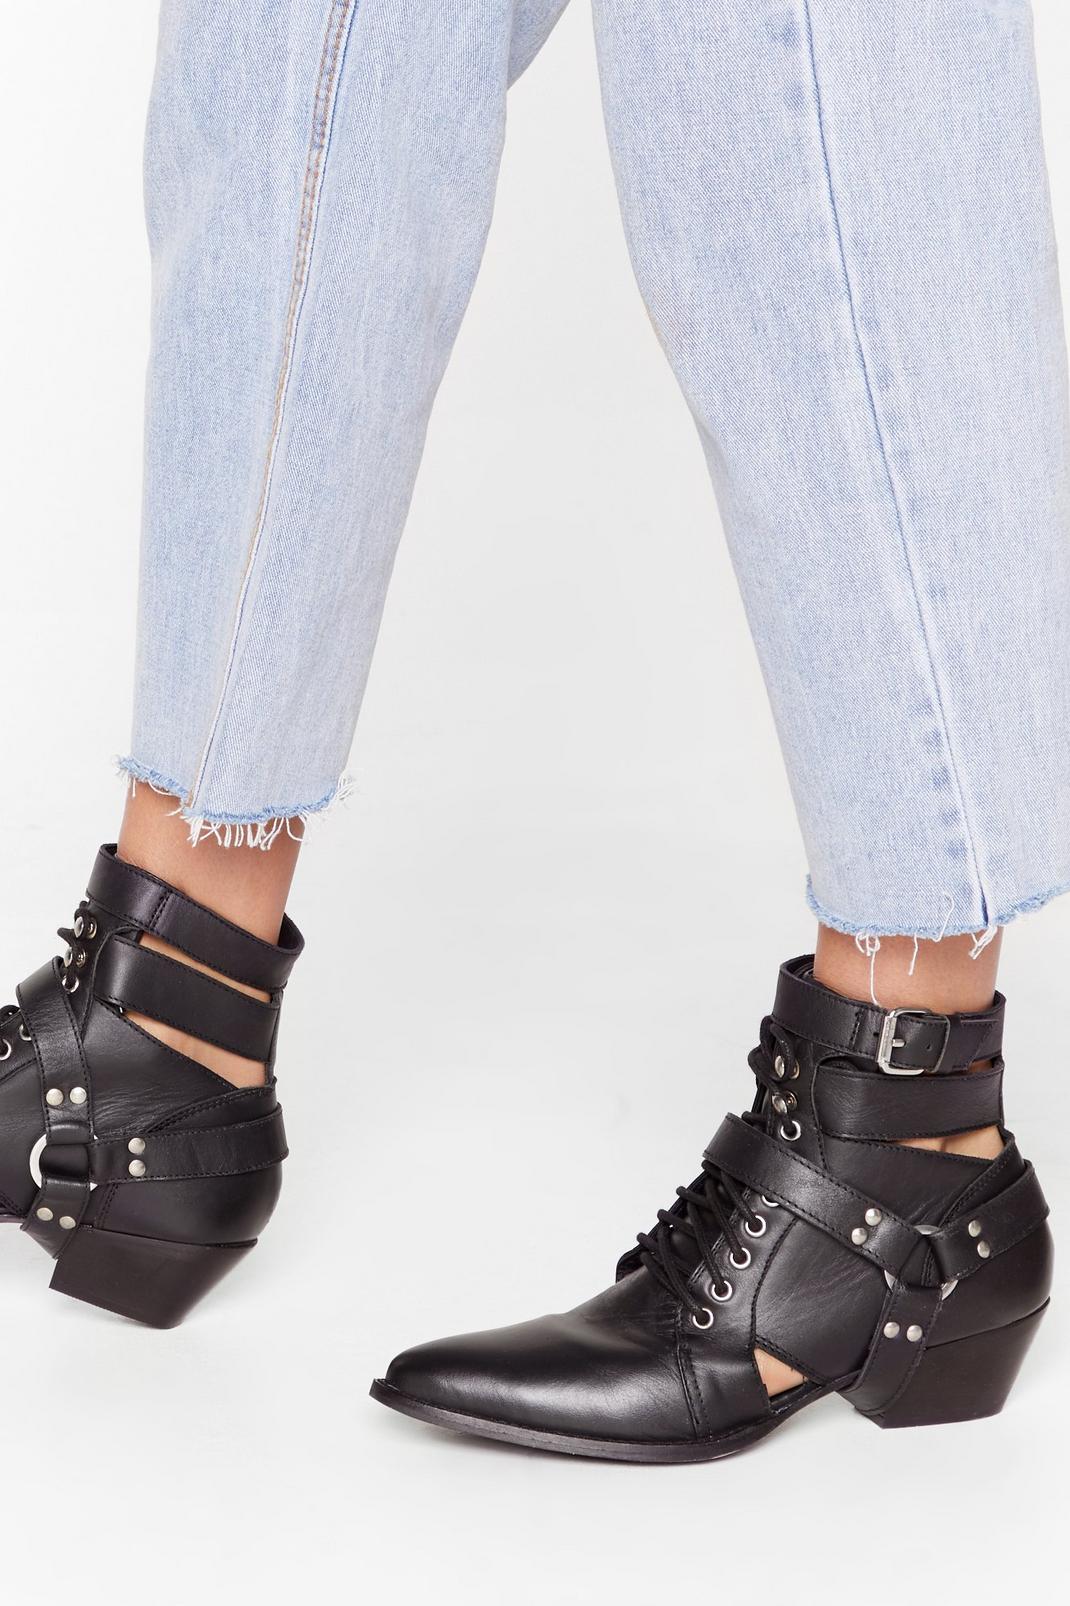 Count Us Cut-Out Leather Lace-Up Boots | Nasty Gal